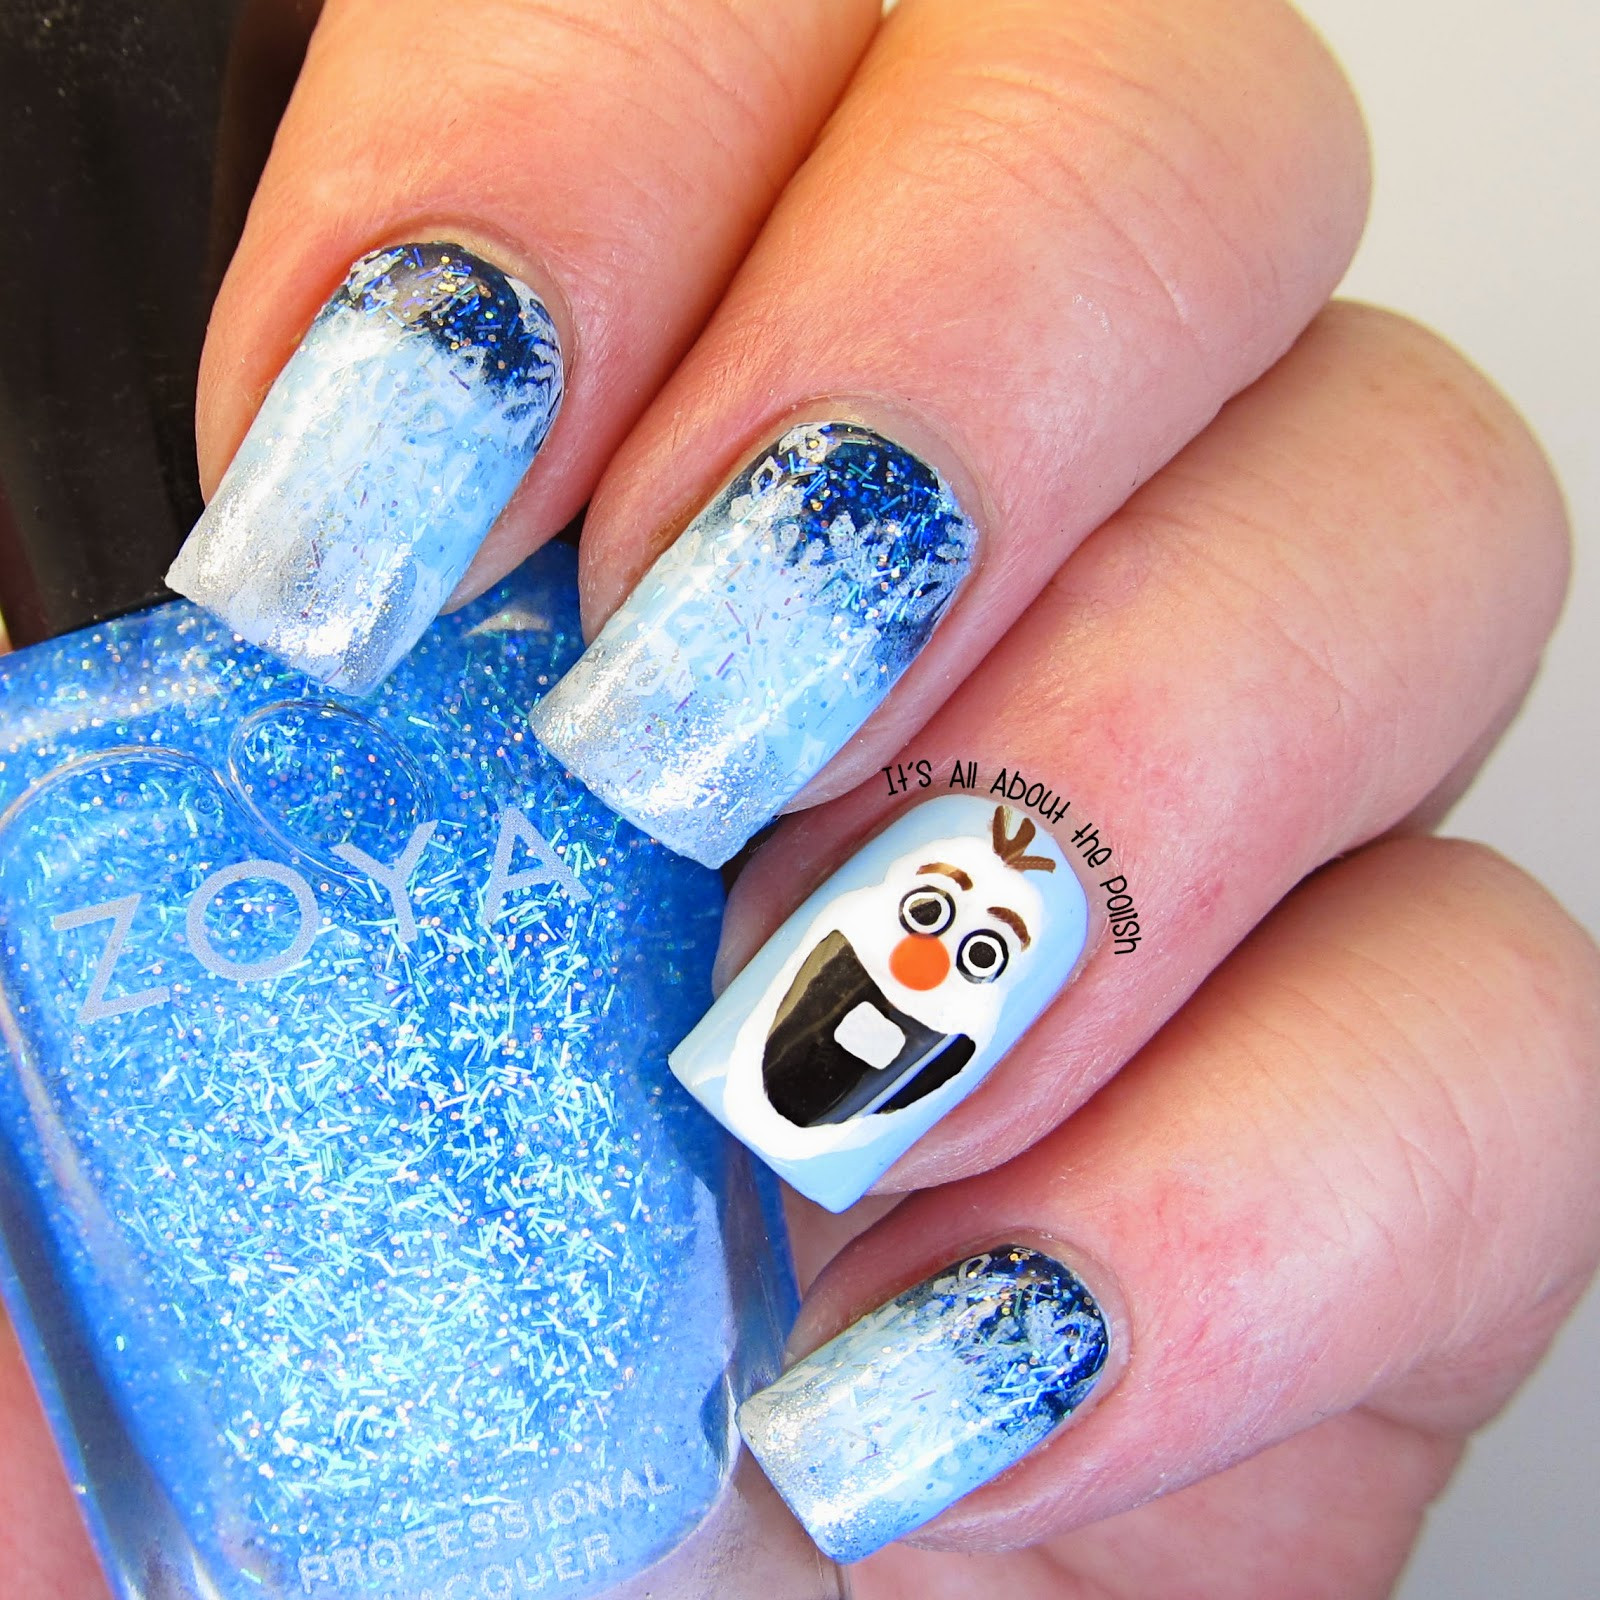 Olaf Nail Designs
 It s all about the polish AN Monday theme Disney Olaf